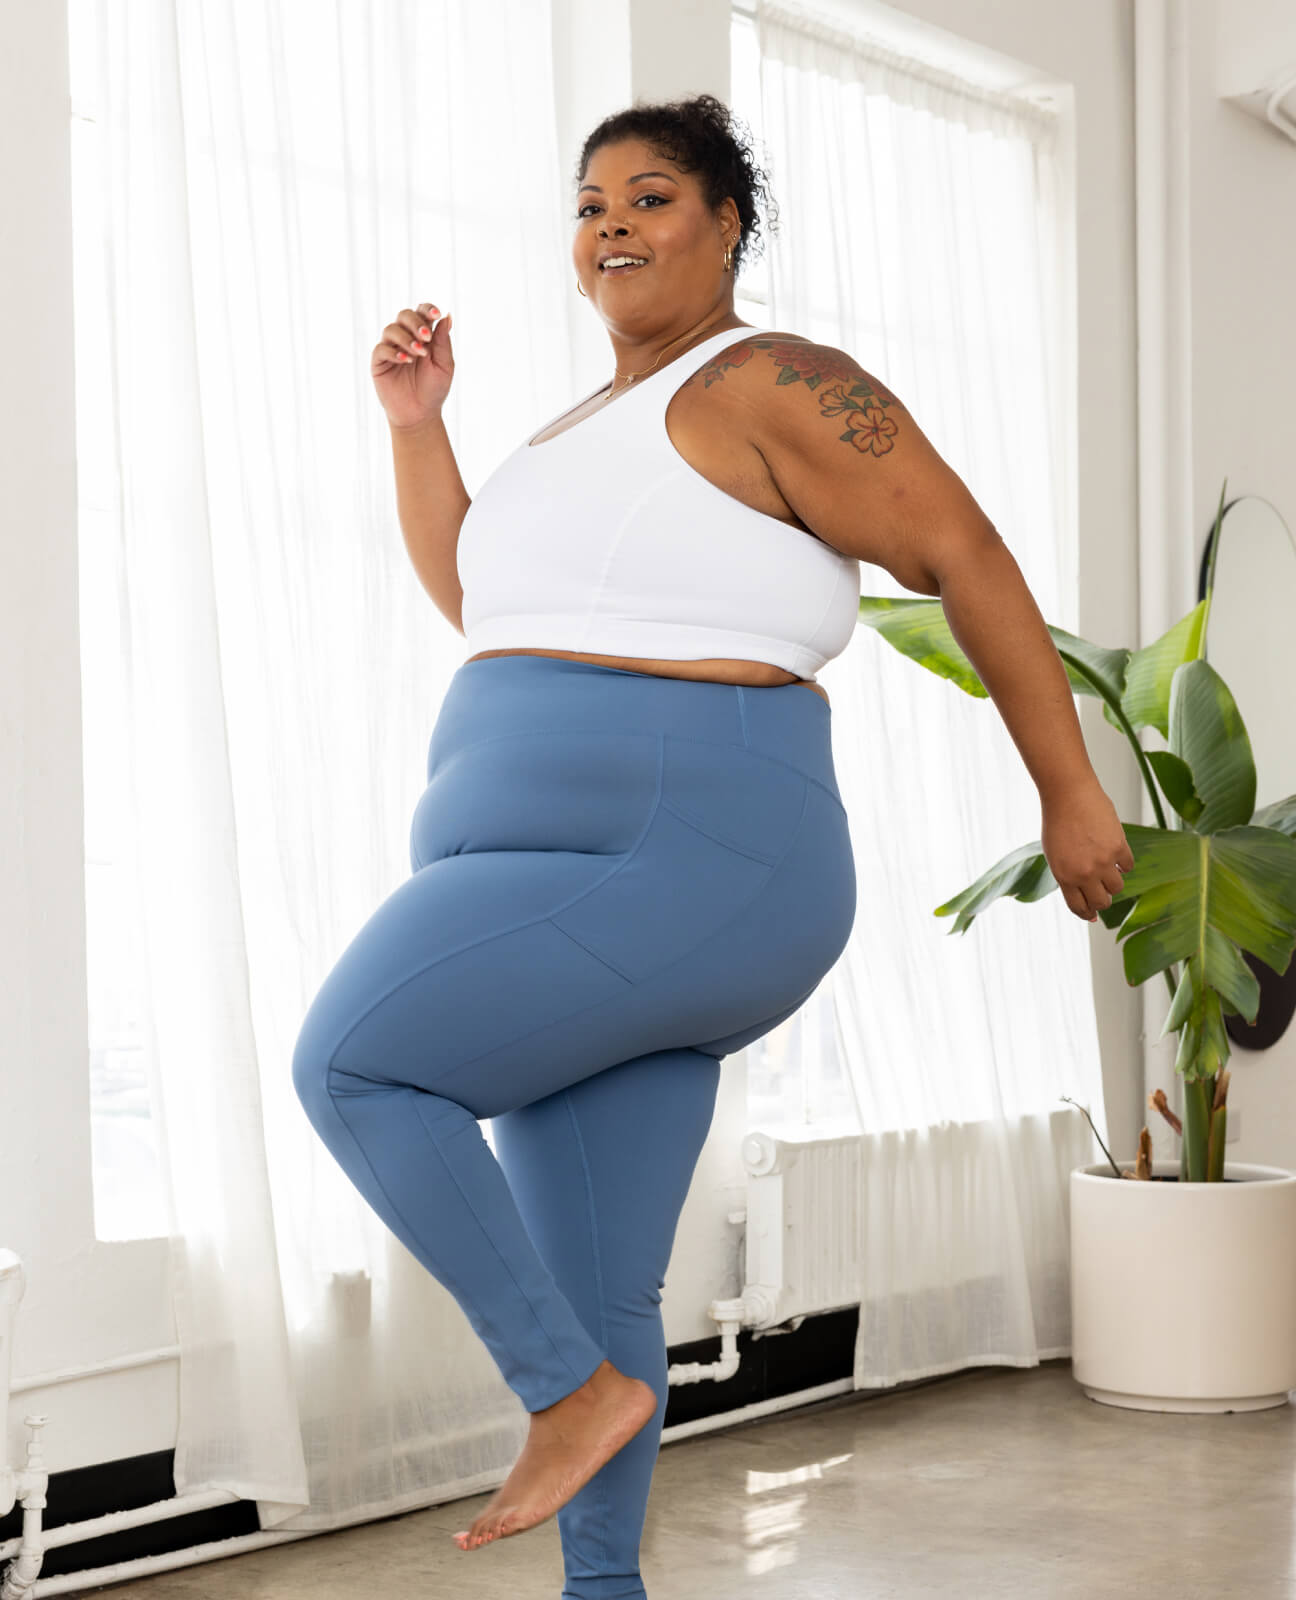 Plus size model and yoga instructor Jessica shows off her plus size leggings with pockets in Moonlight Blue by Superfit Hero